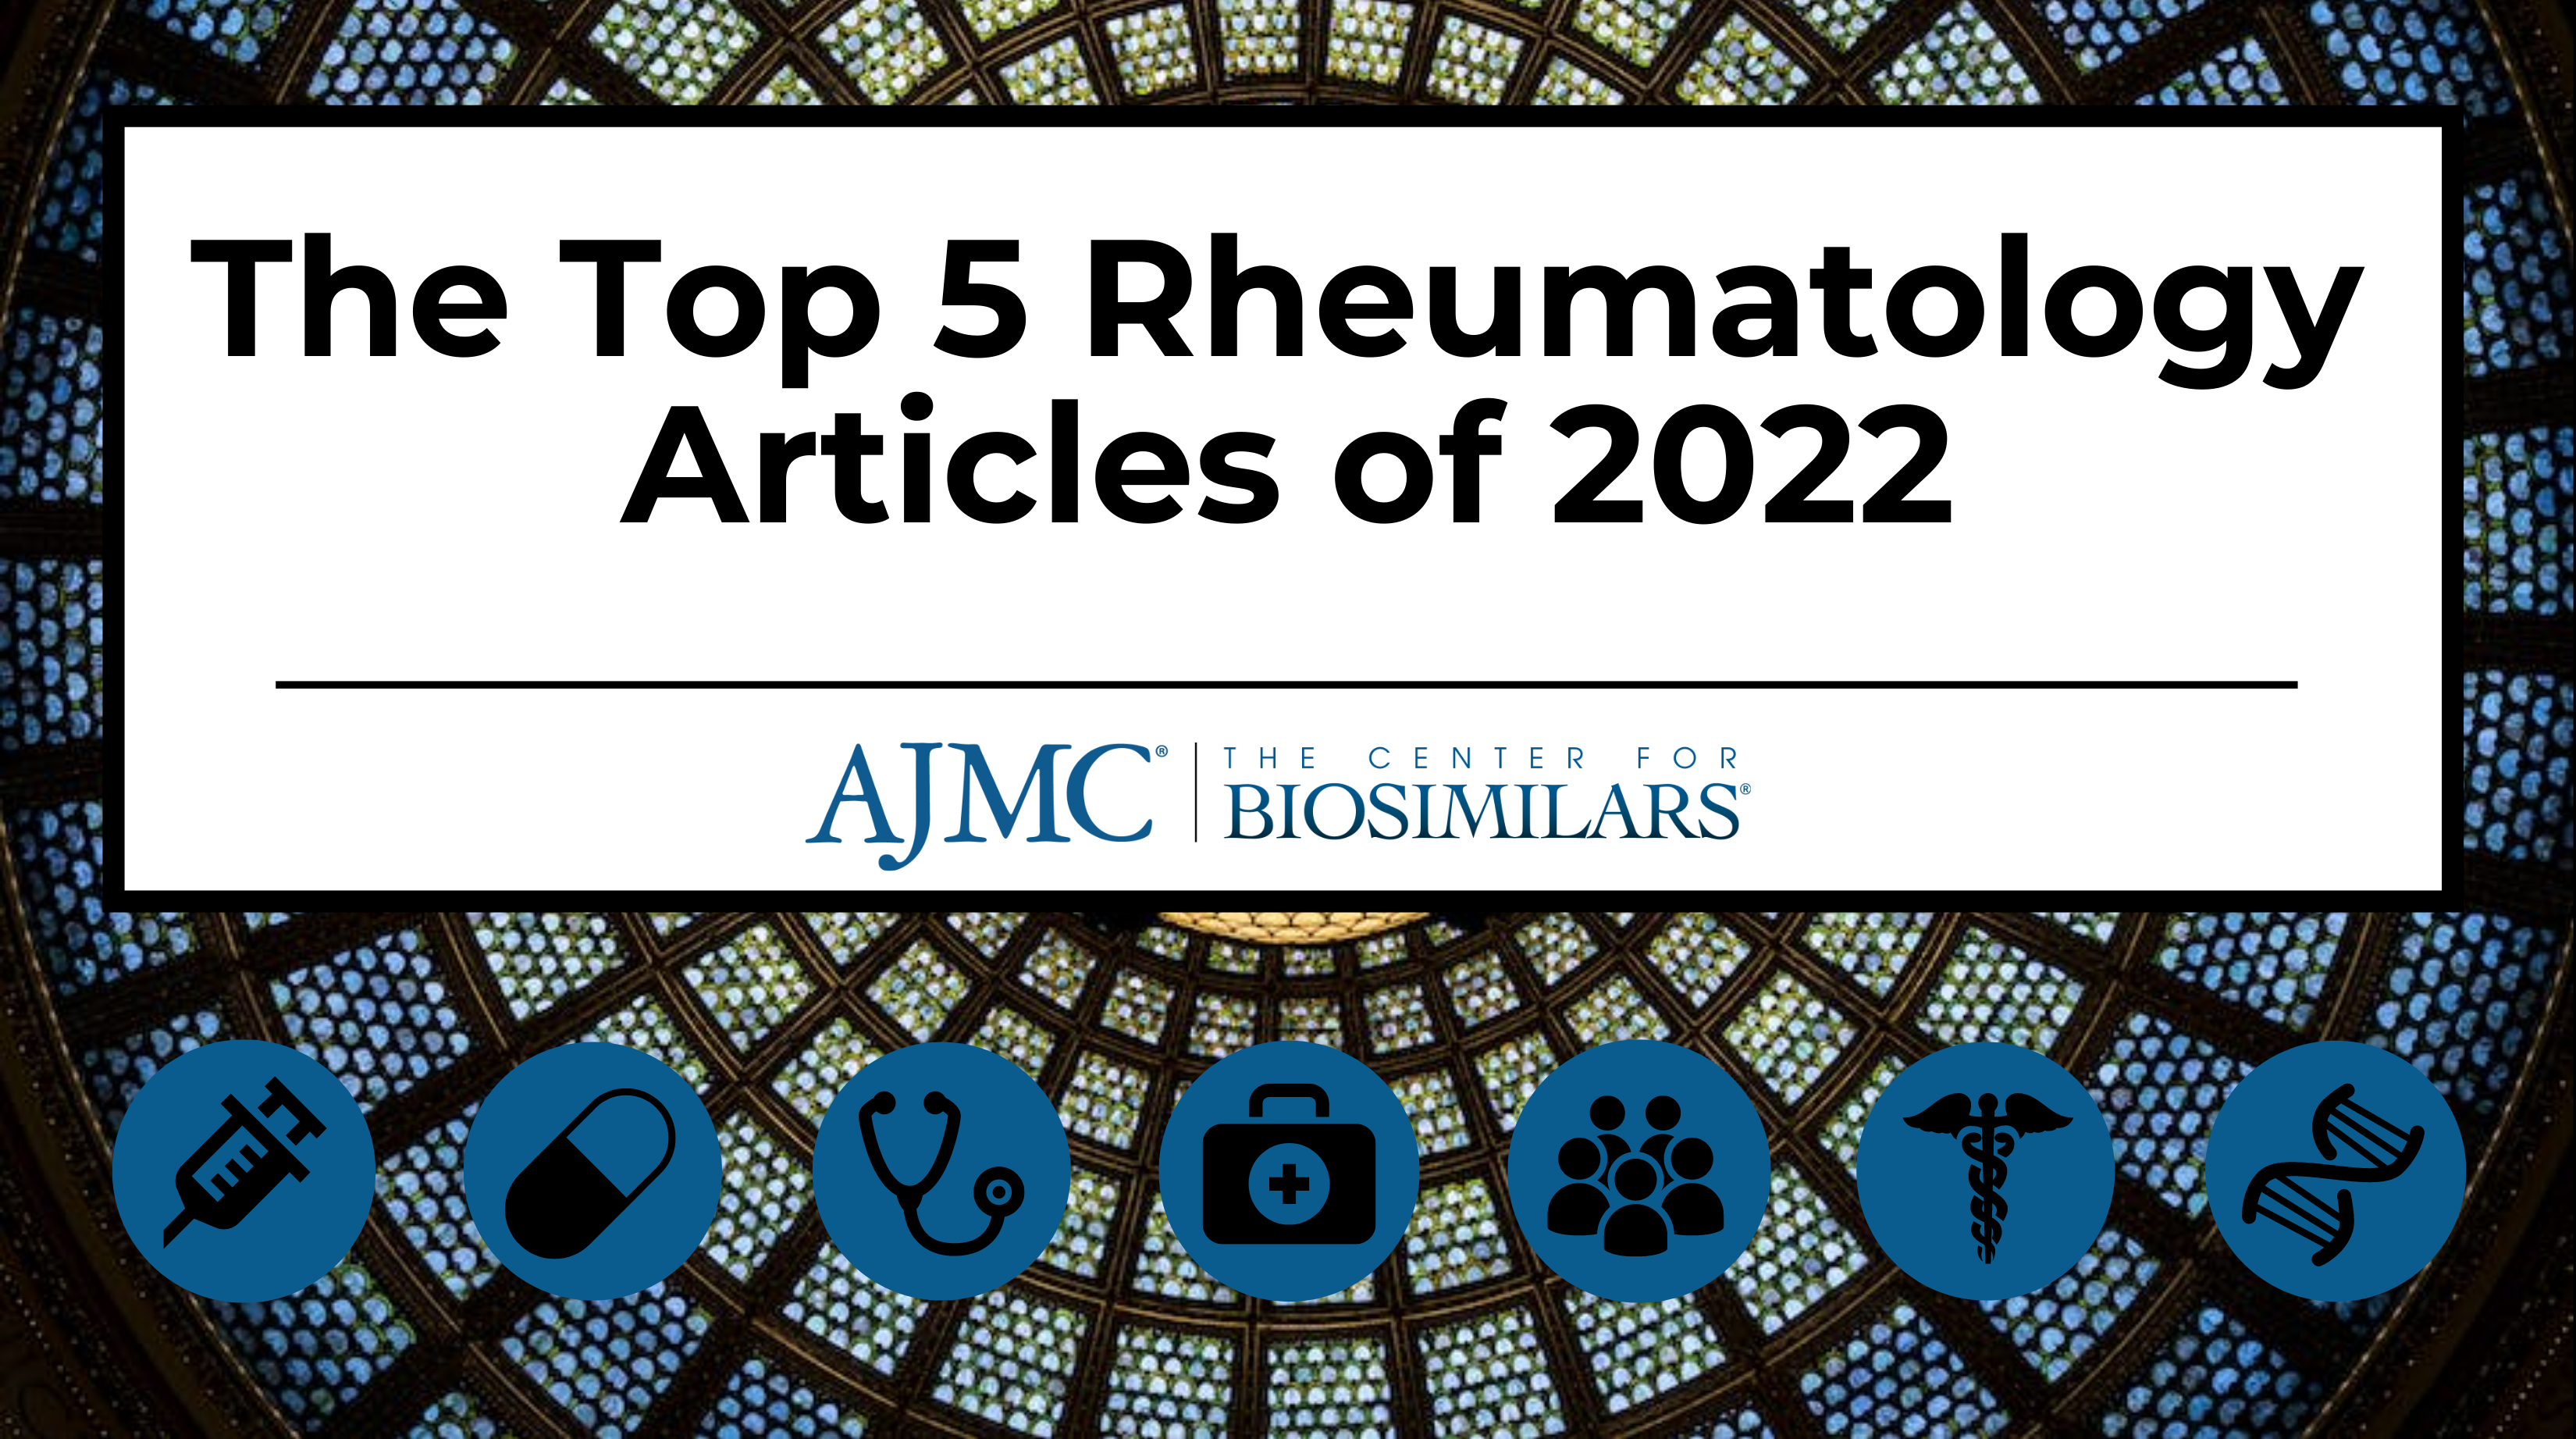 The Top 5 Rheumatology Articles of 2022